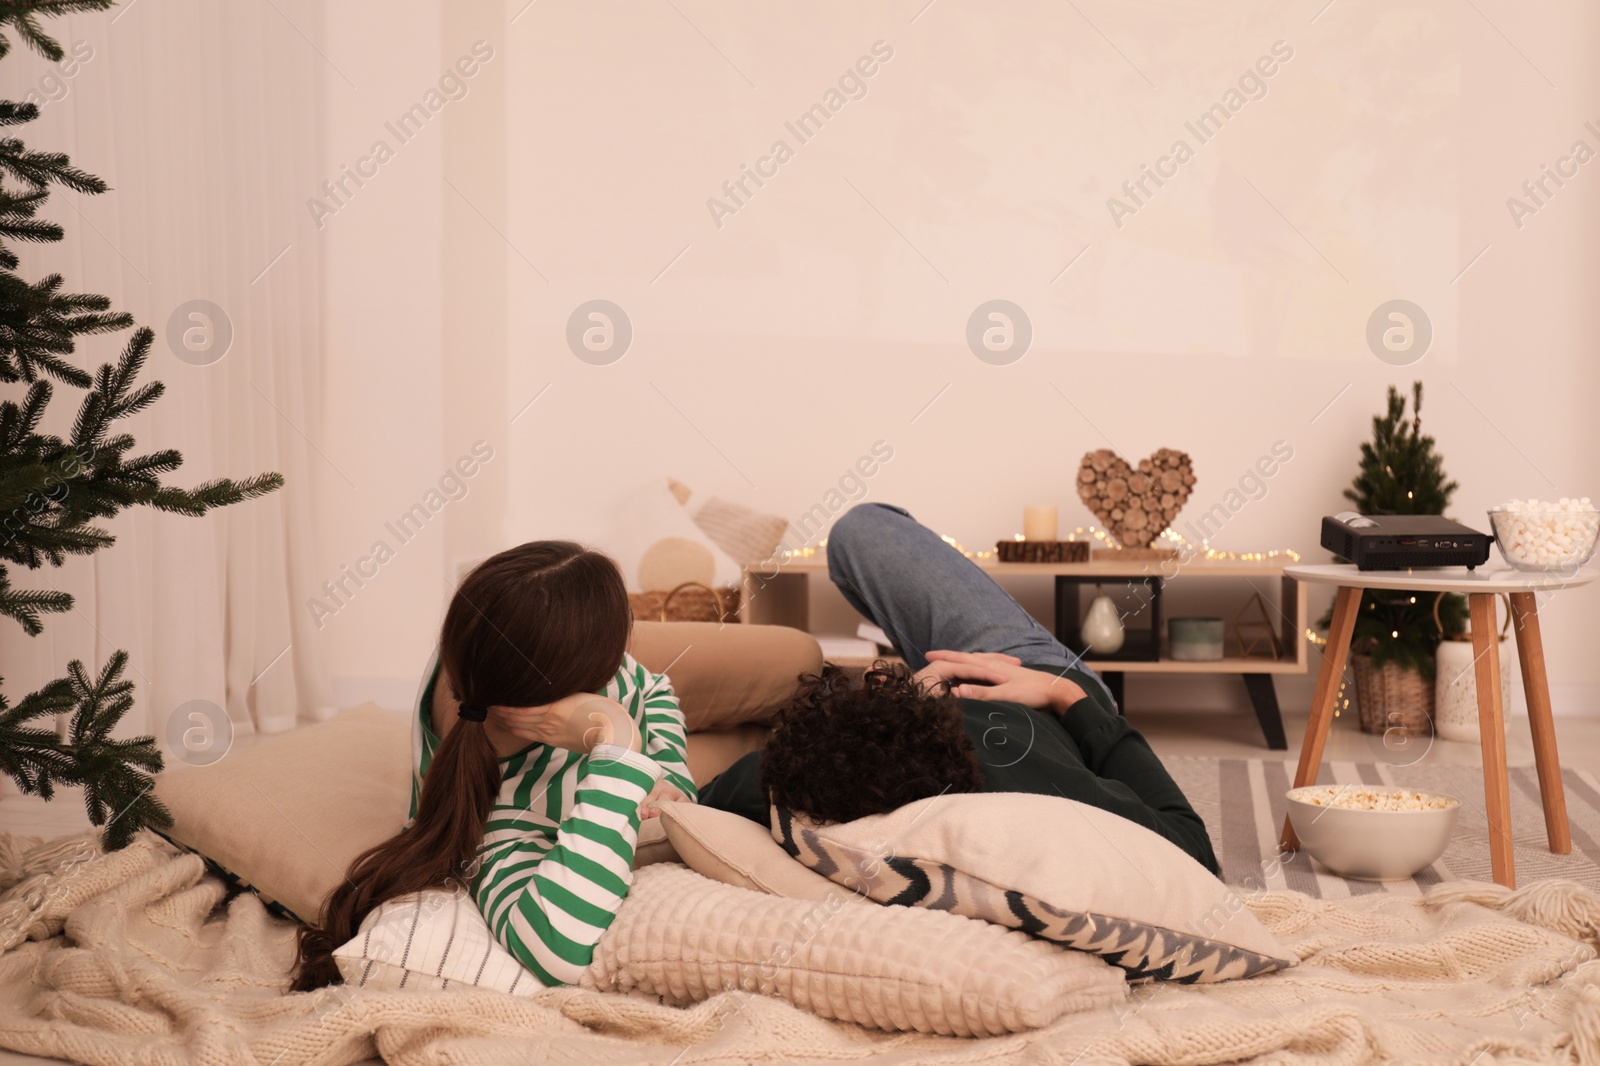 Photo of Couple watching movie via video projector at home